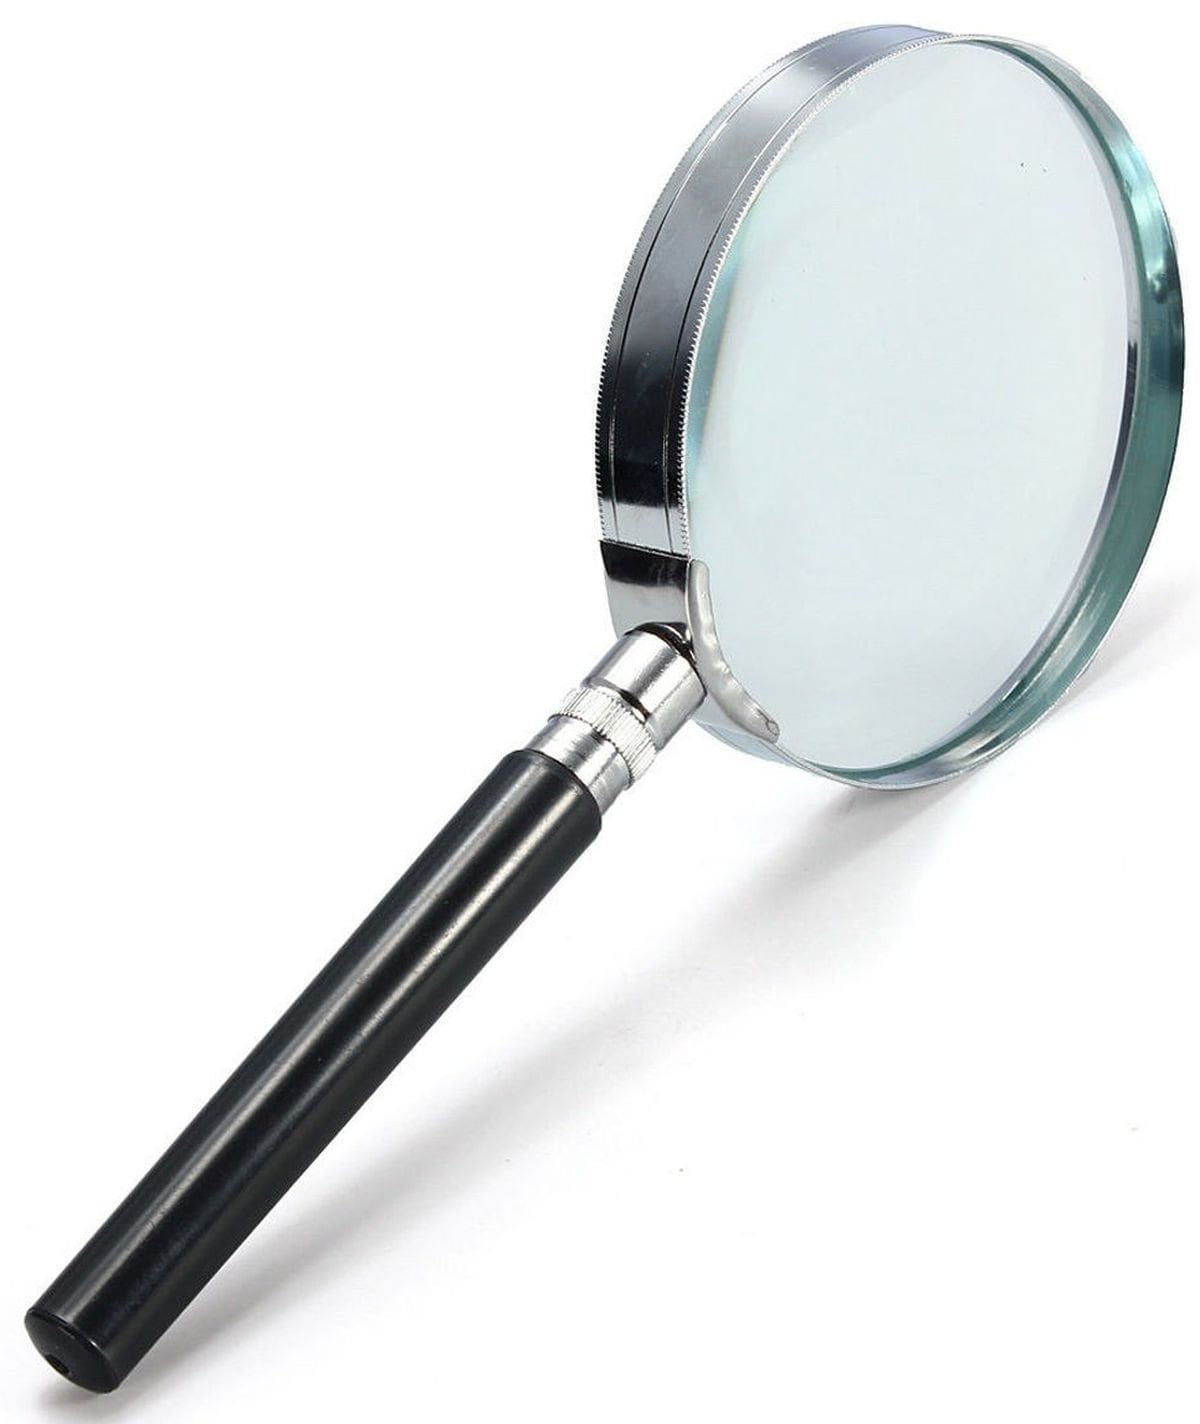 5 Best Magnifying Glass for Reading Books You Can Buy in [2022] 